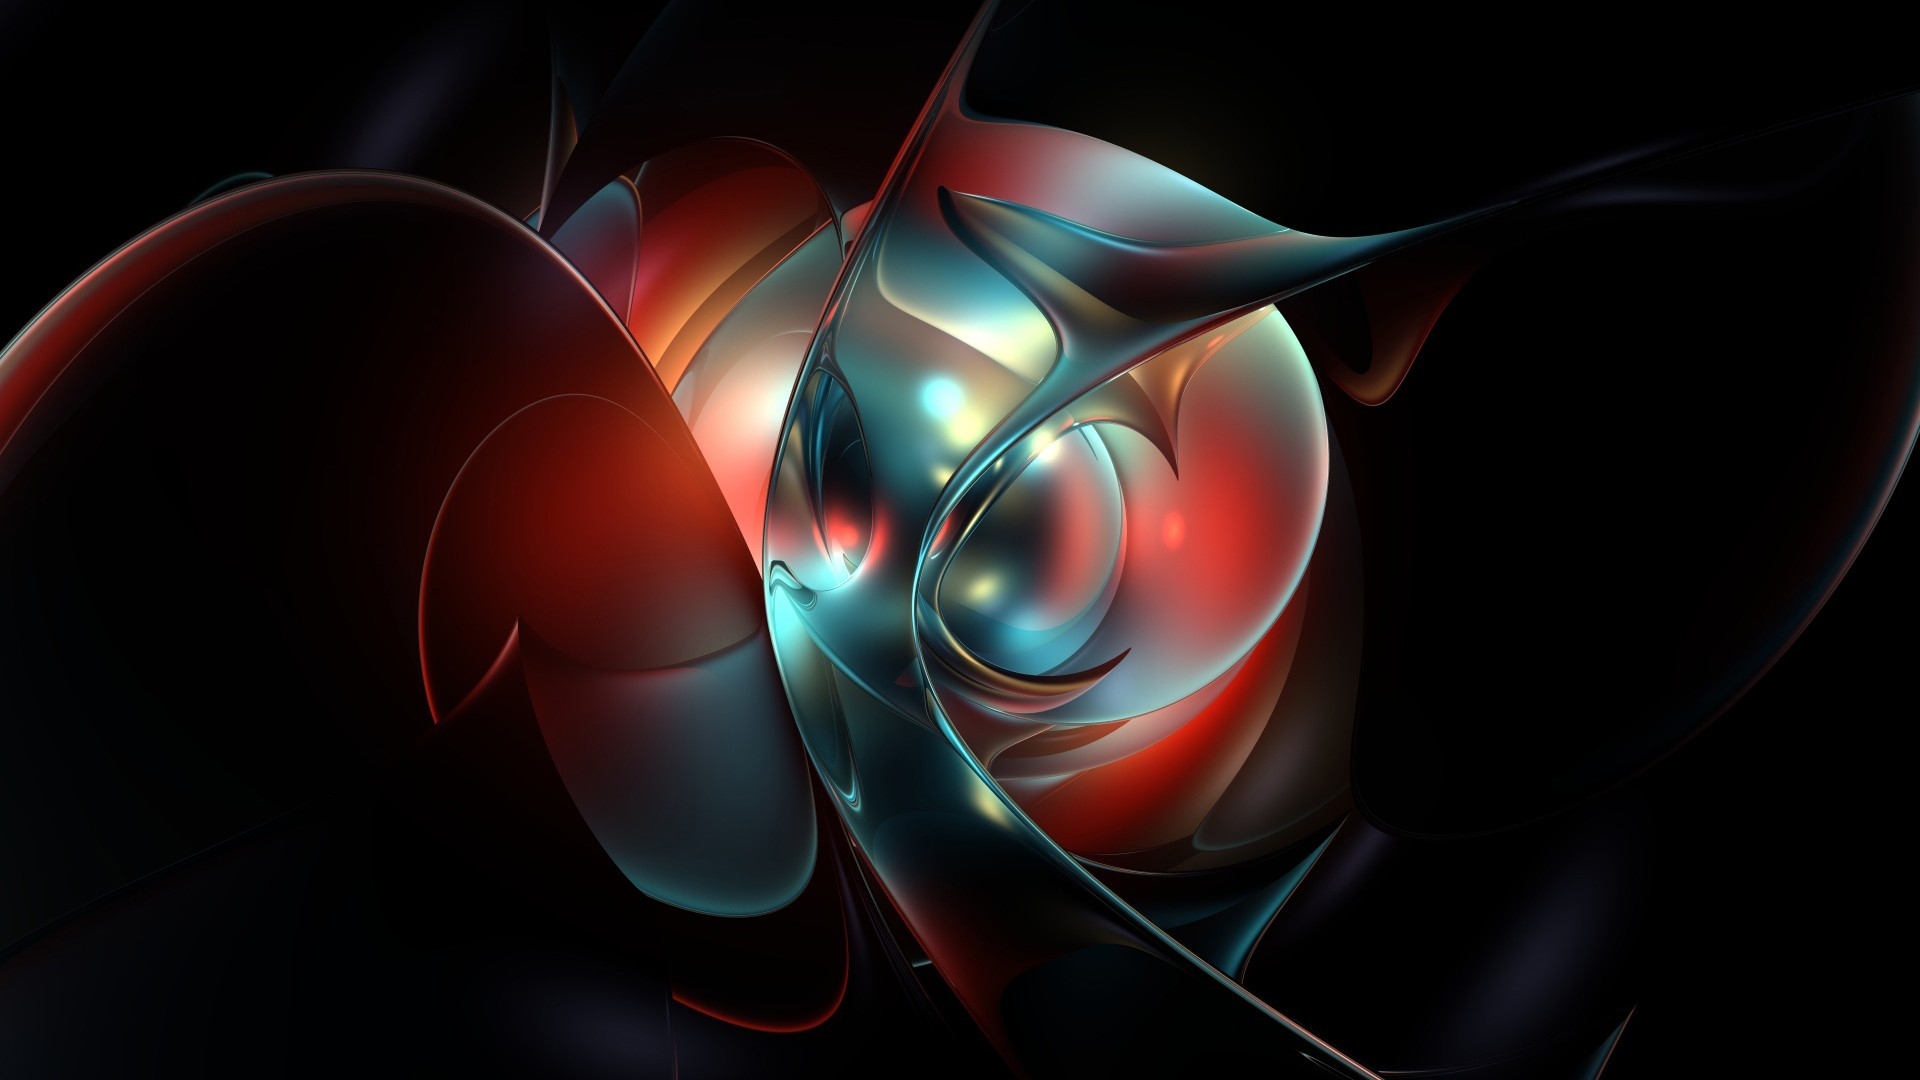 Abstract Geometric Shapes for 1920 x 1080 HDTV 1080p resolution